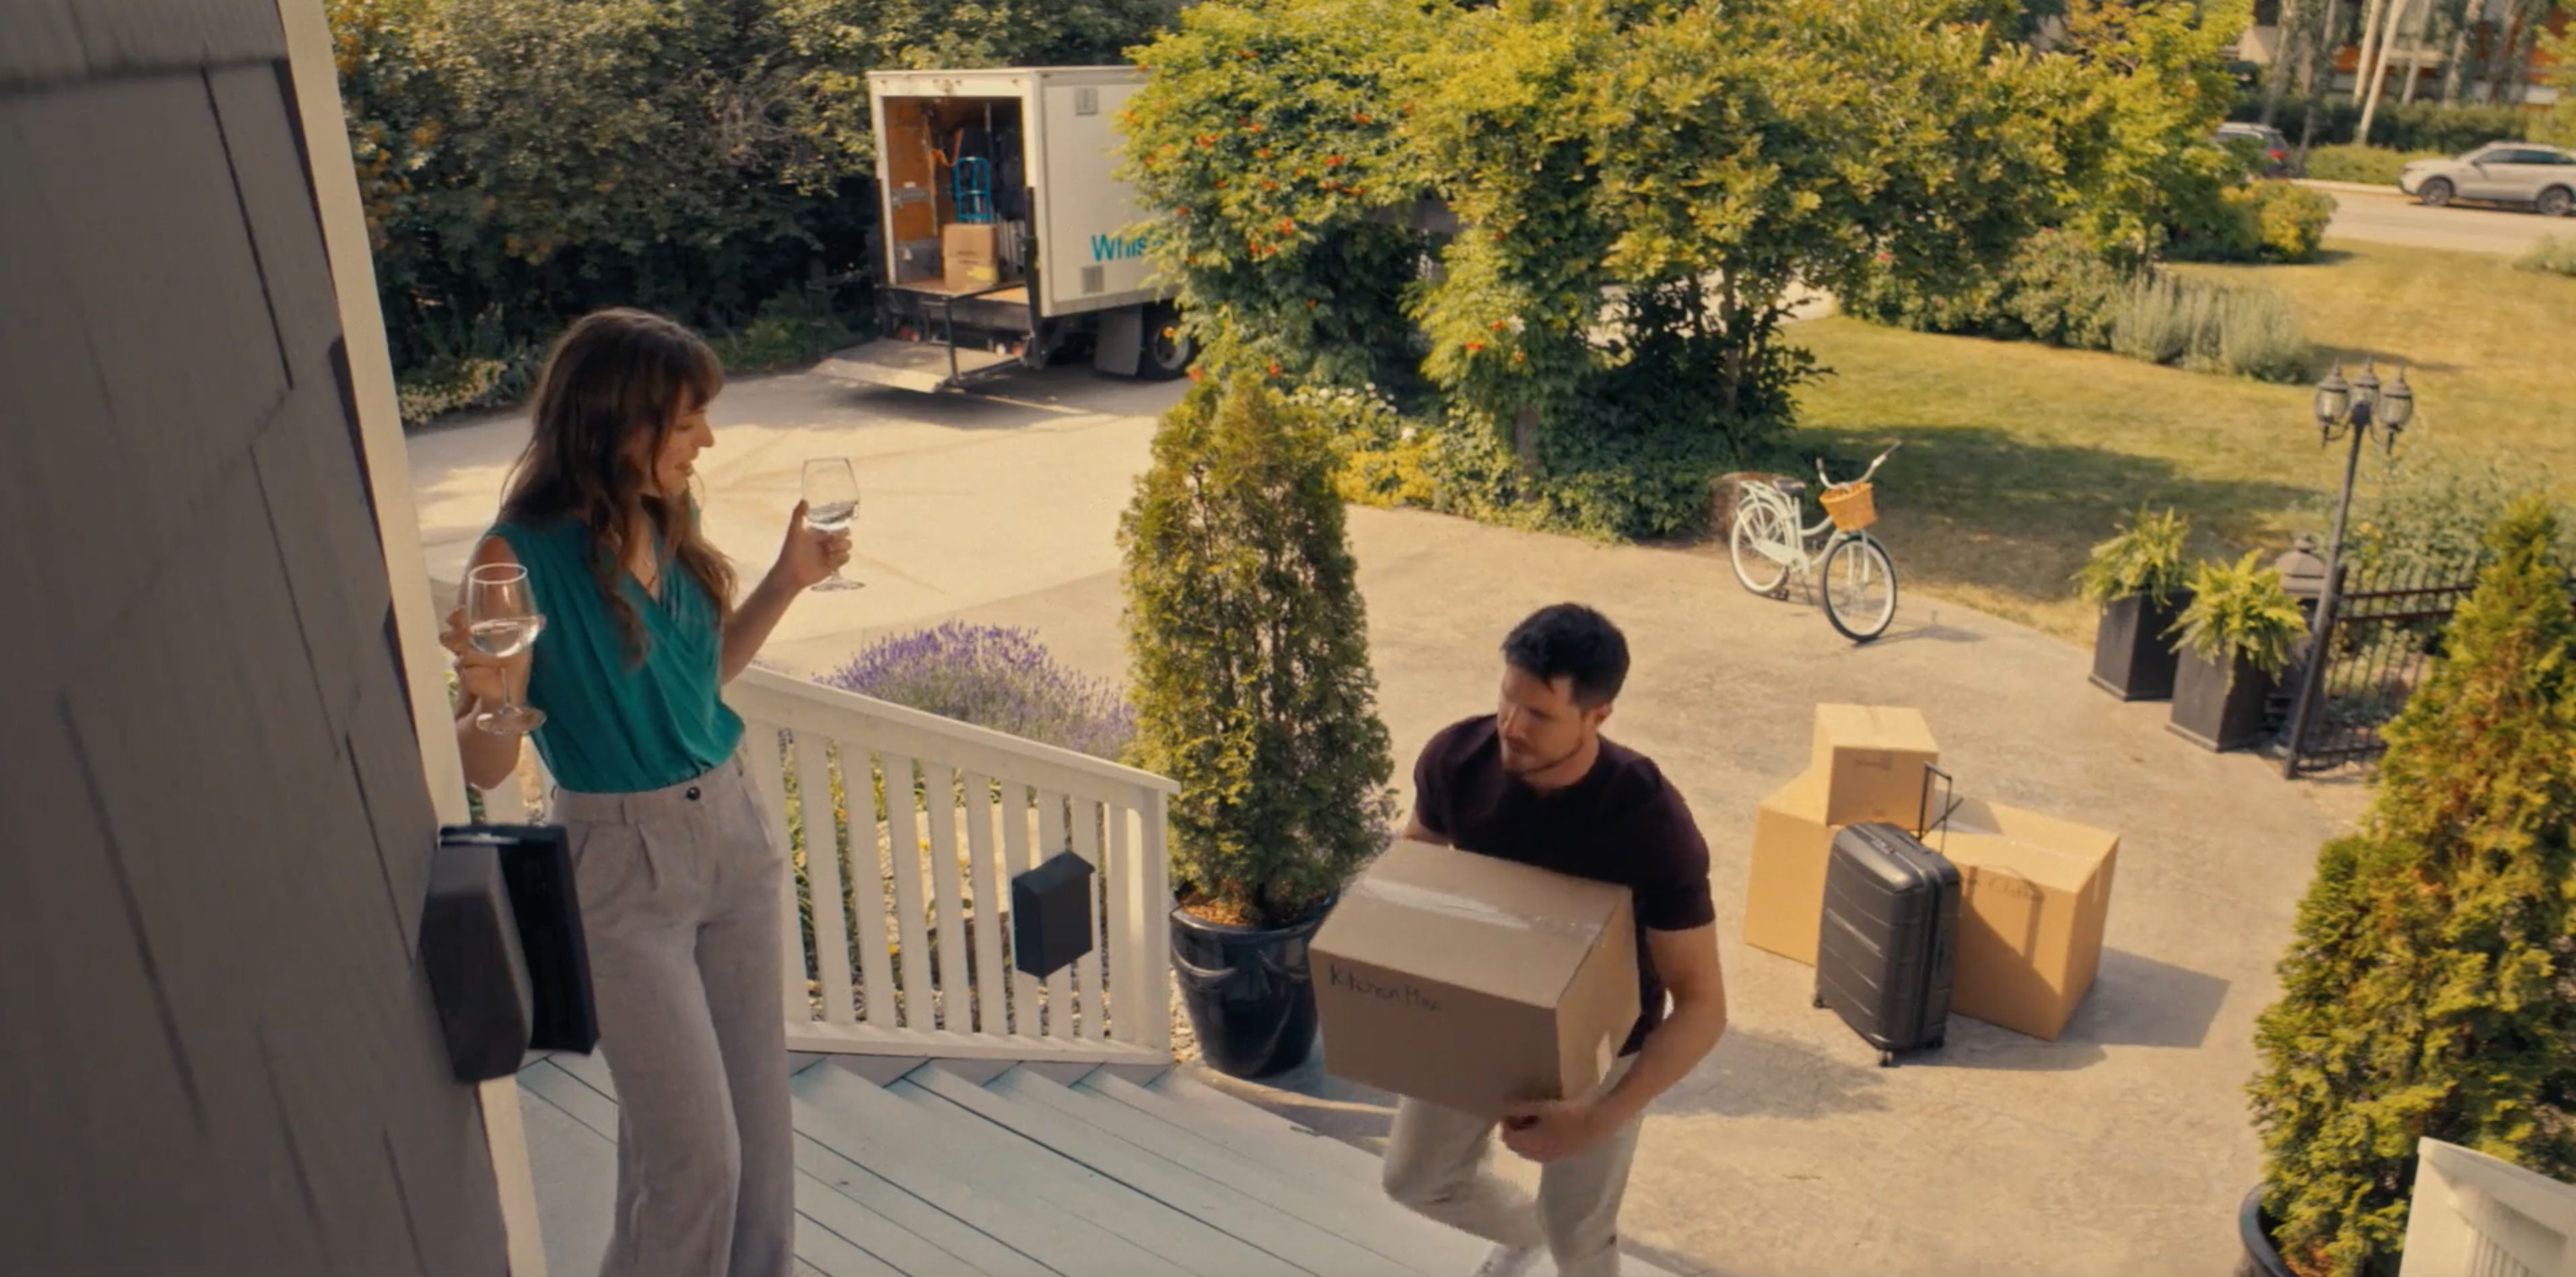 ali holds wine while graham carries boxes into house